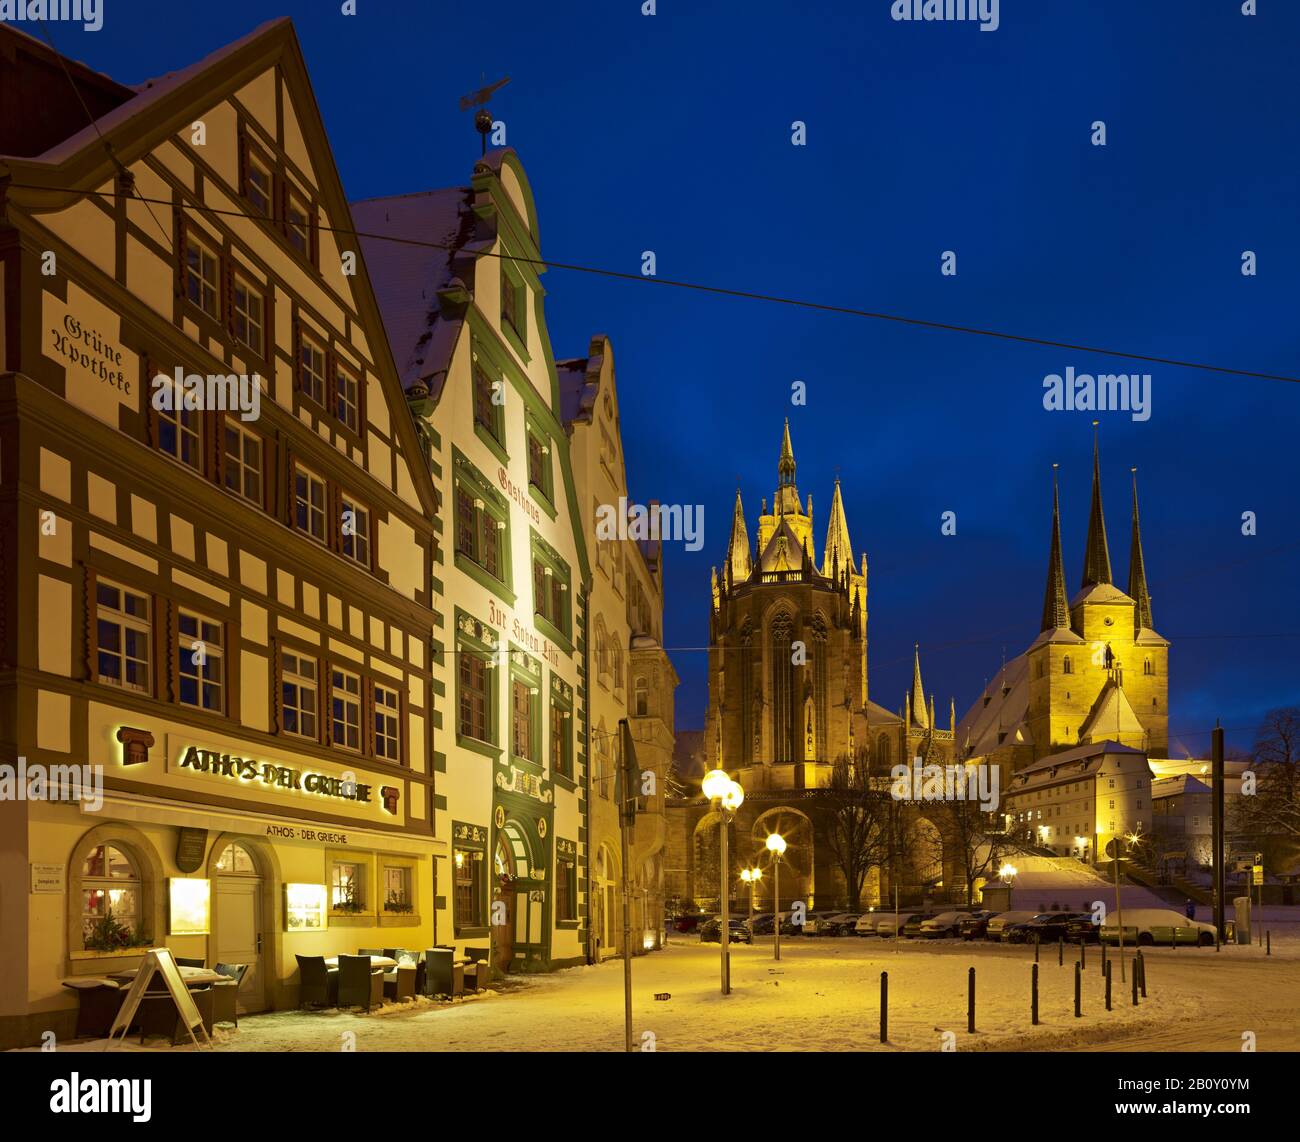 St. Mary's Cathedral and Severikirche, Haus zur Hohen Lilie and Grüne Apotheke, dusk, Erfurt, Thuringia, Germany, Stock Photo